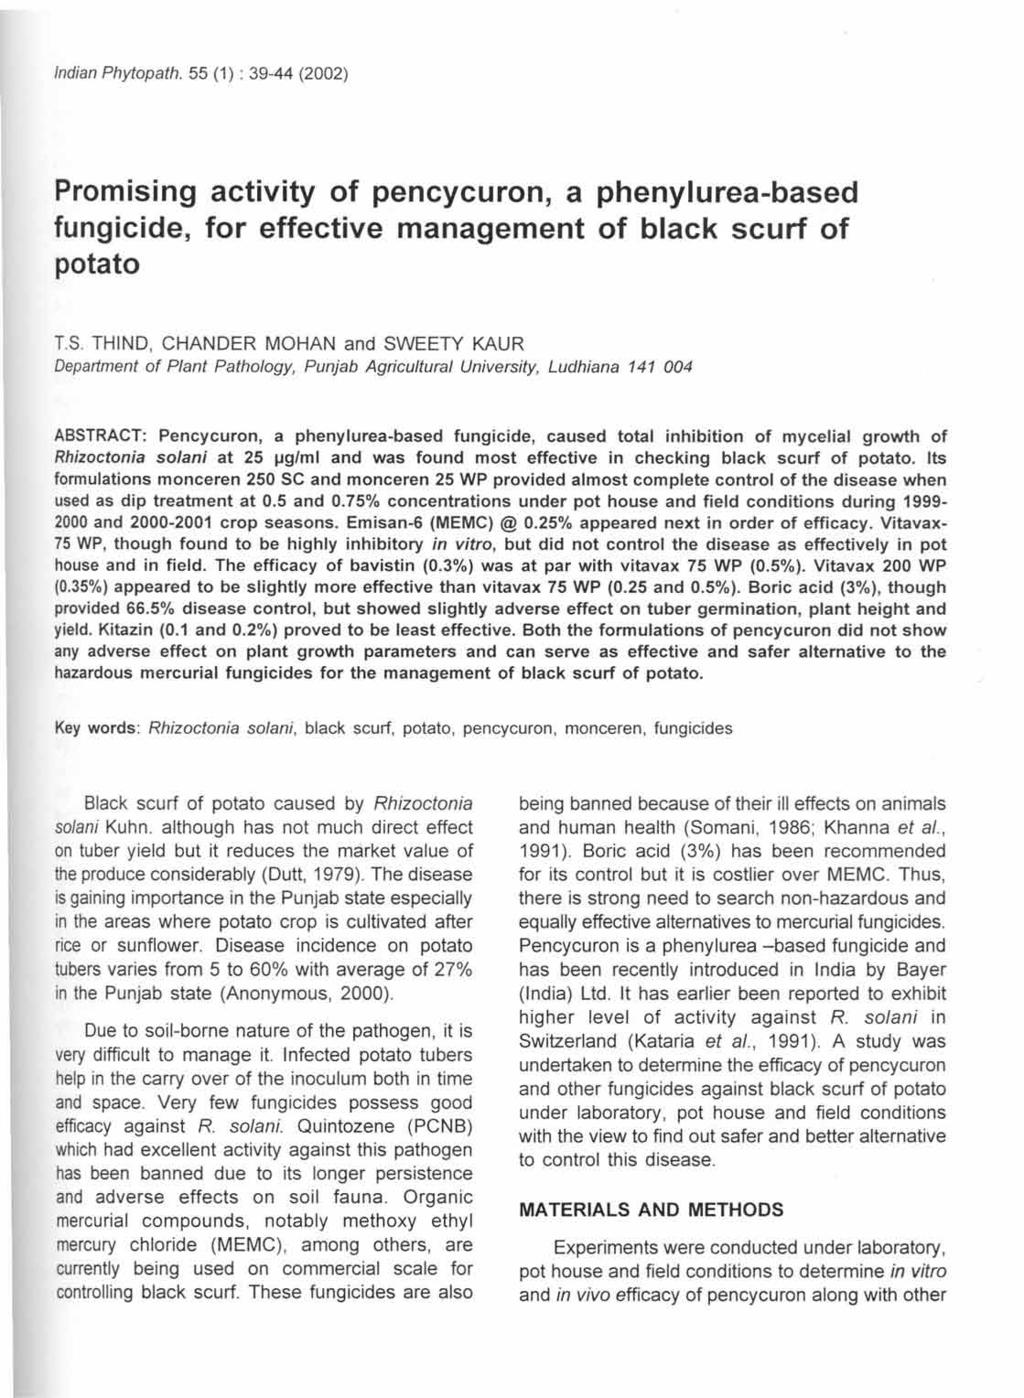 Indian Phytopath. 55 (1) : 39-44 (2002) Promising activity of pencycuron, a phenylurea-based fungicide, for effective management of black scurf of potato T.S.